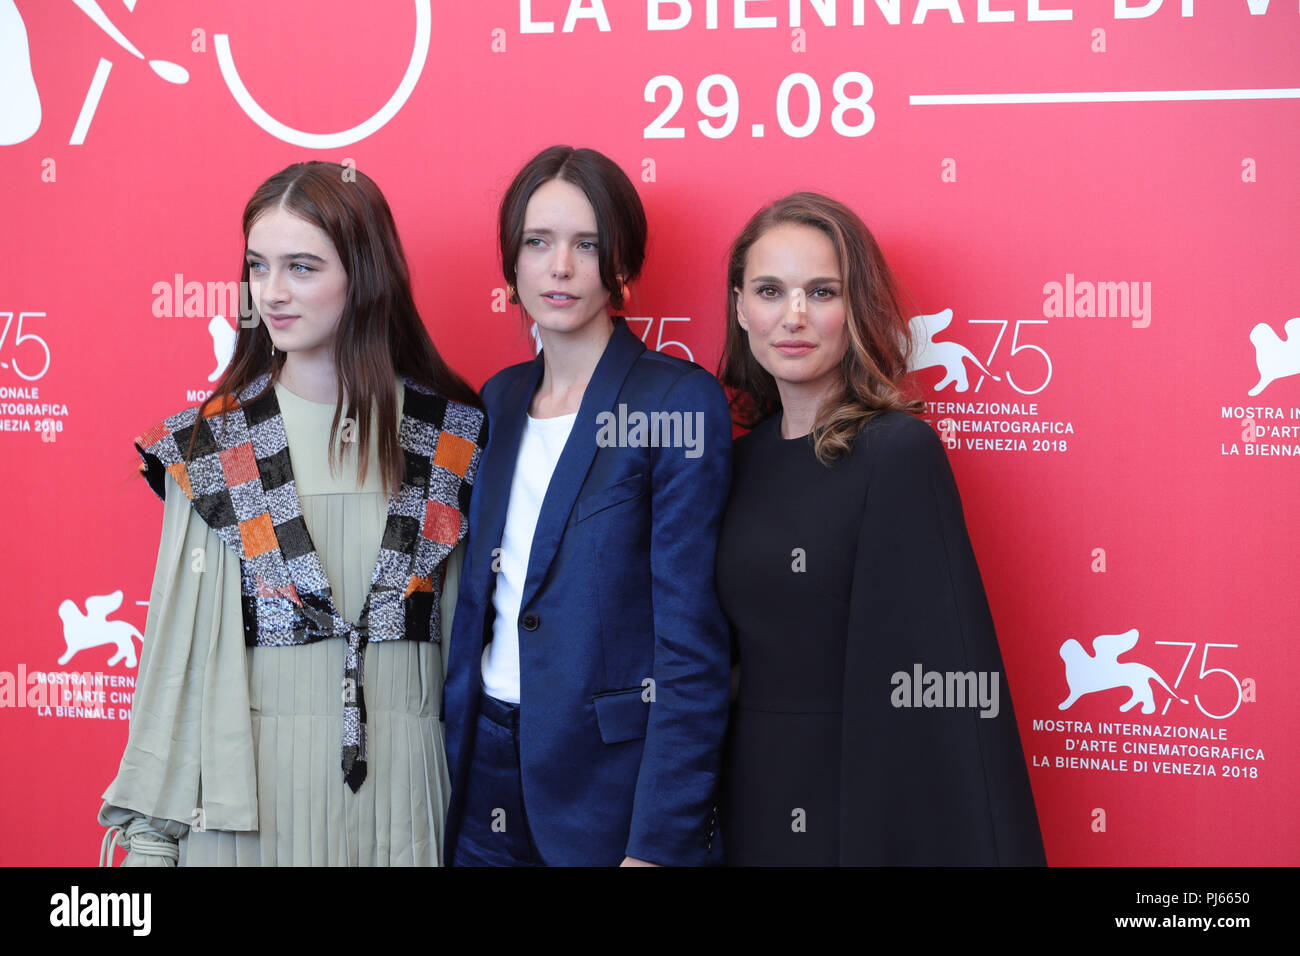 (180904) -- VENICE, Sept. 4, 2018 (Xinhua) -- Actress Raffey Cassidy, Stacy Martin and Natalie Portman (L to R) attend 'Vox Lux' photocall during the 75th Venice International Film Festival in Venice, Italy, Sept. 4, 2018. (Xinhua/Cheng Tingting) (yg) Stock Photo